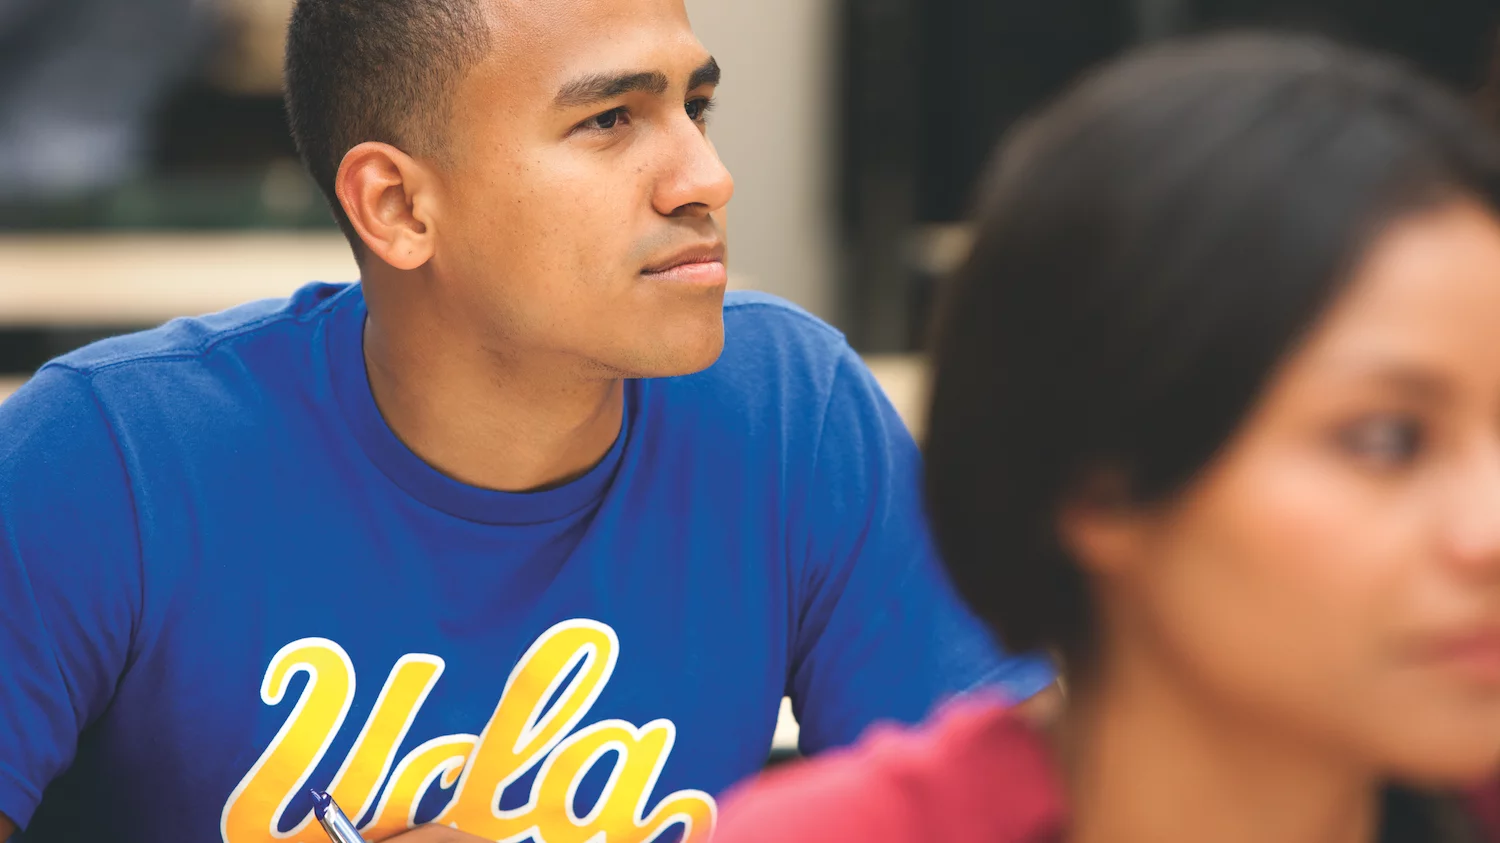 A black male medical student in medical school wearing a blue UCLA shirt